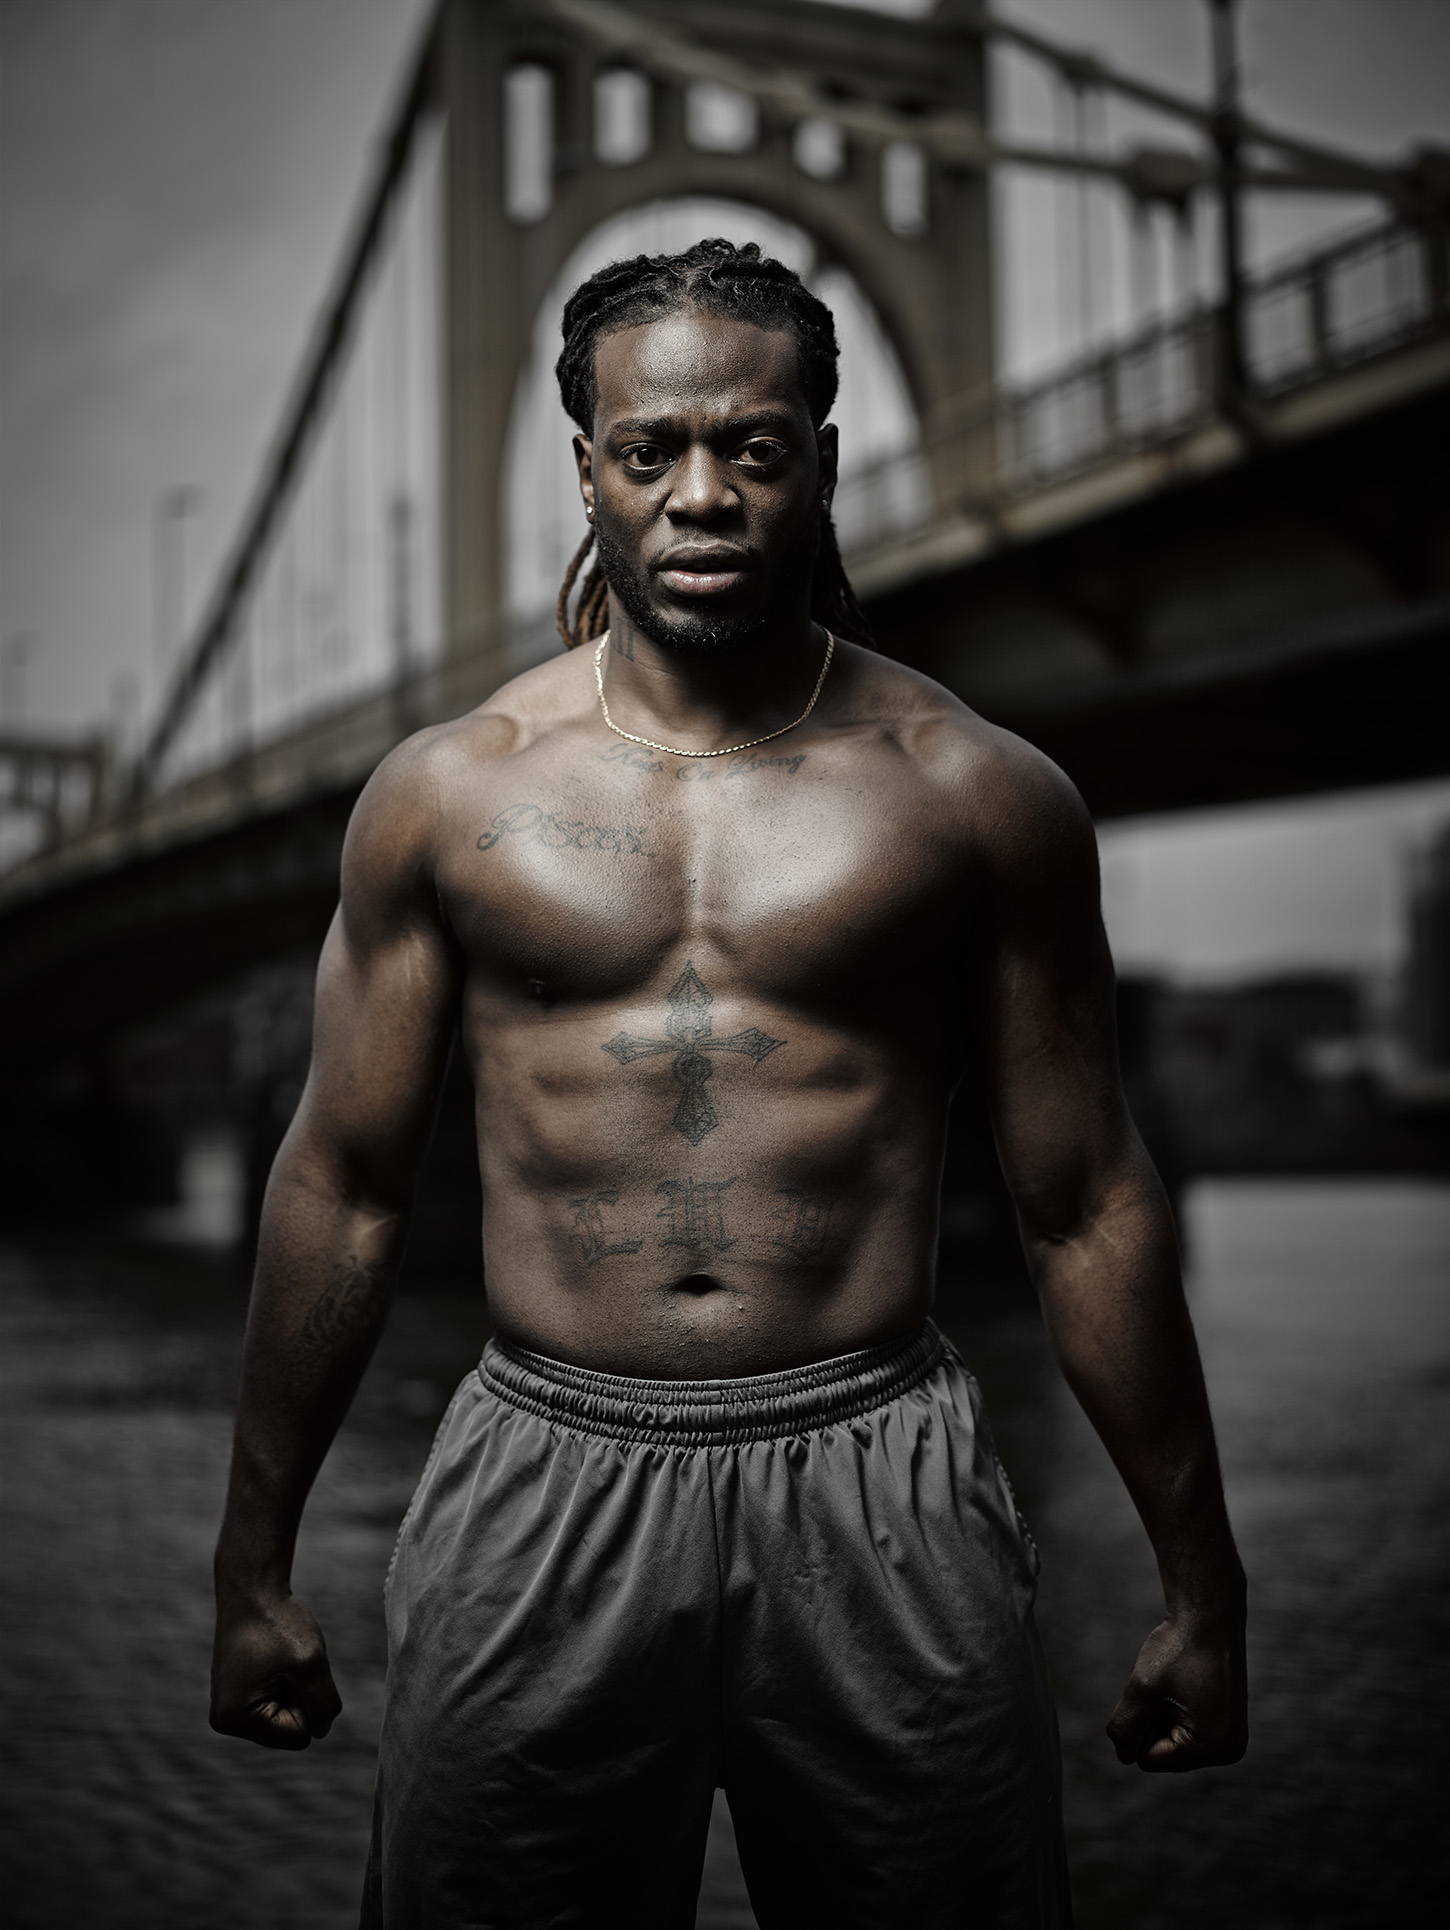 Outdoor fitness lifestyle photography in an urban setting by Travis Neely Photography